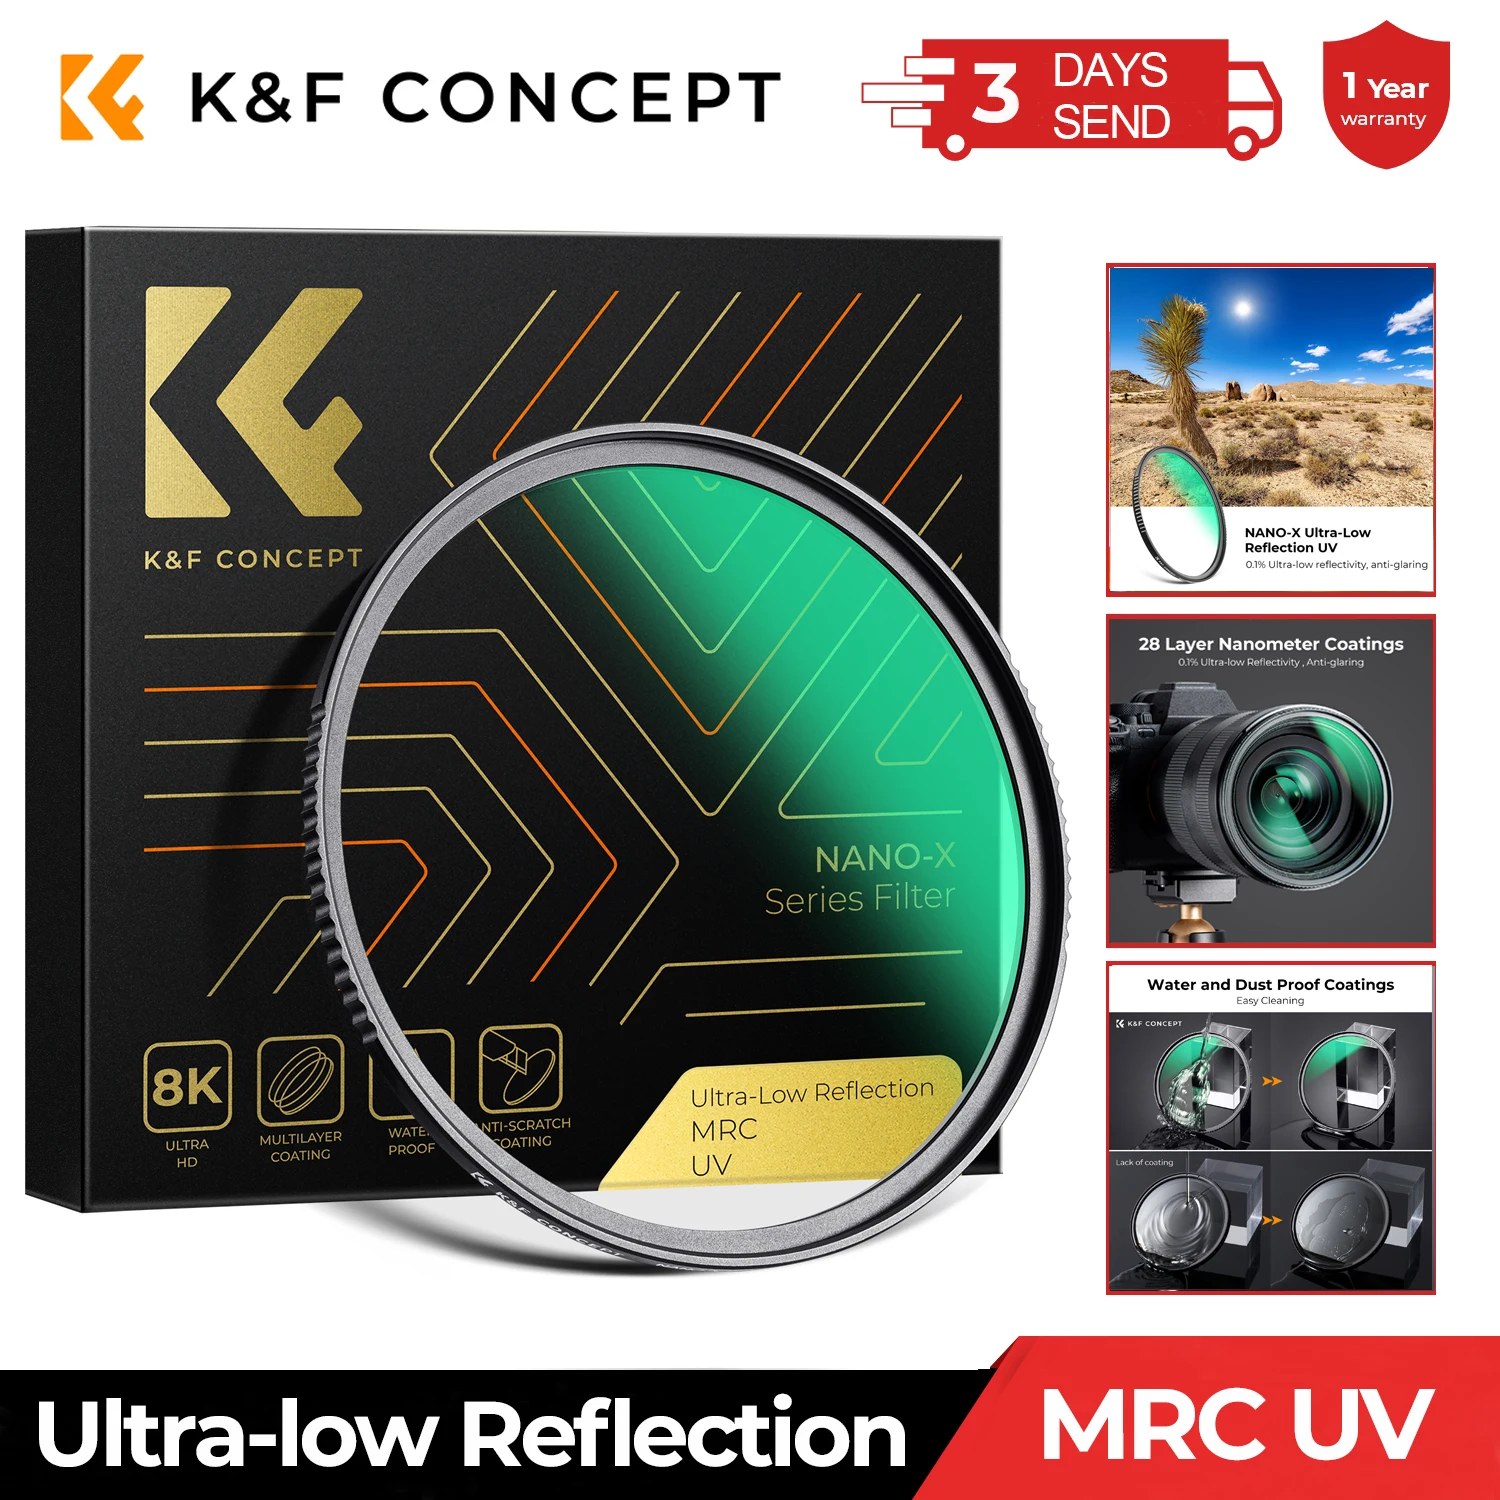 

K&F Concept Ultra-low Reflection UV Filter with 28 Multi-Layer Coatings MRC Optical Glass 37-95mm for Camera Lens Nano-X Series